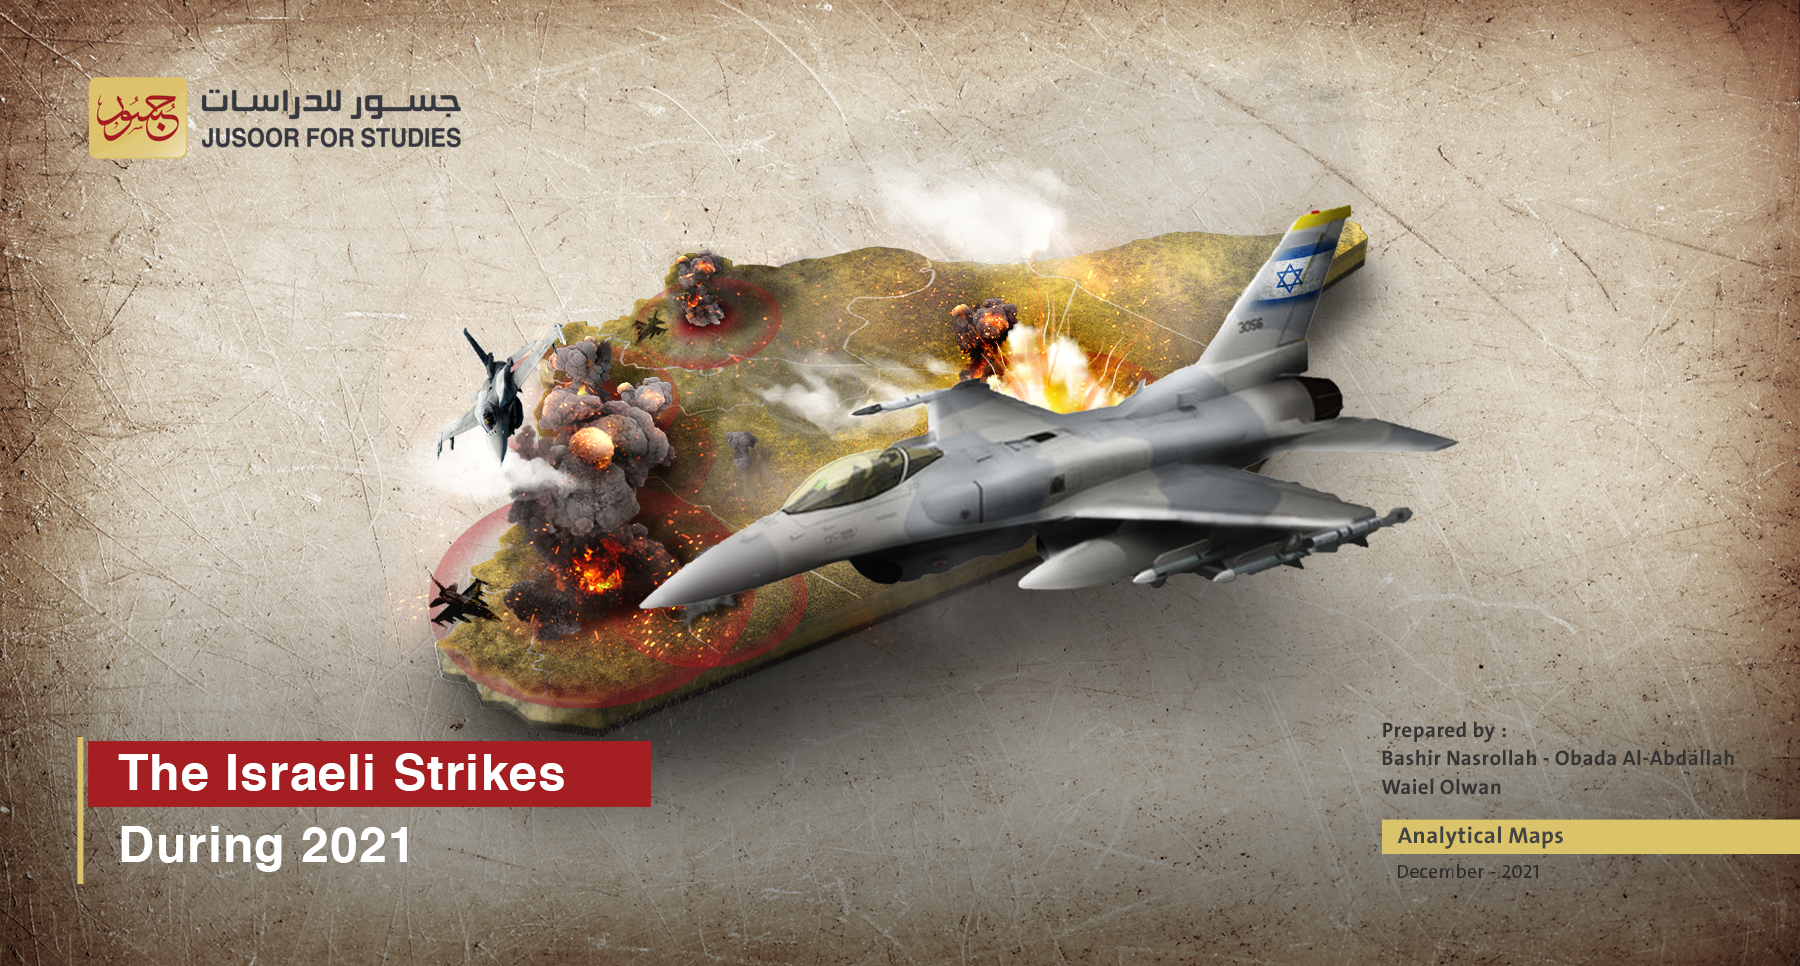 The Israeli Strikes in Syria during 2021